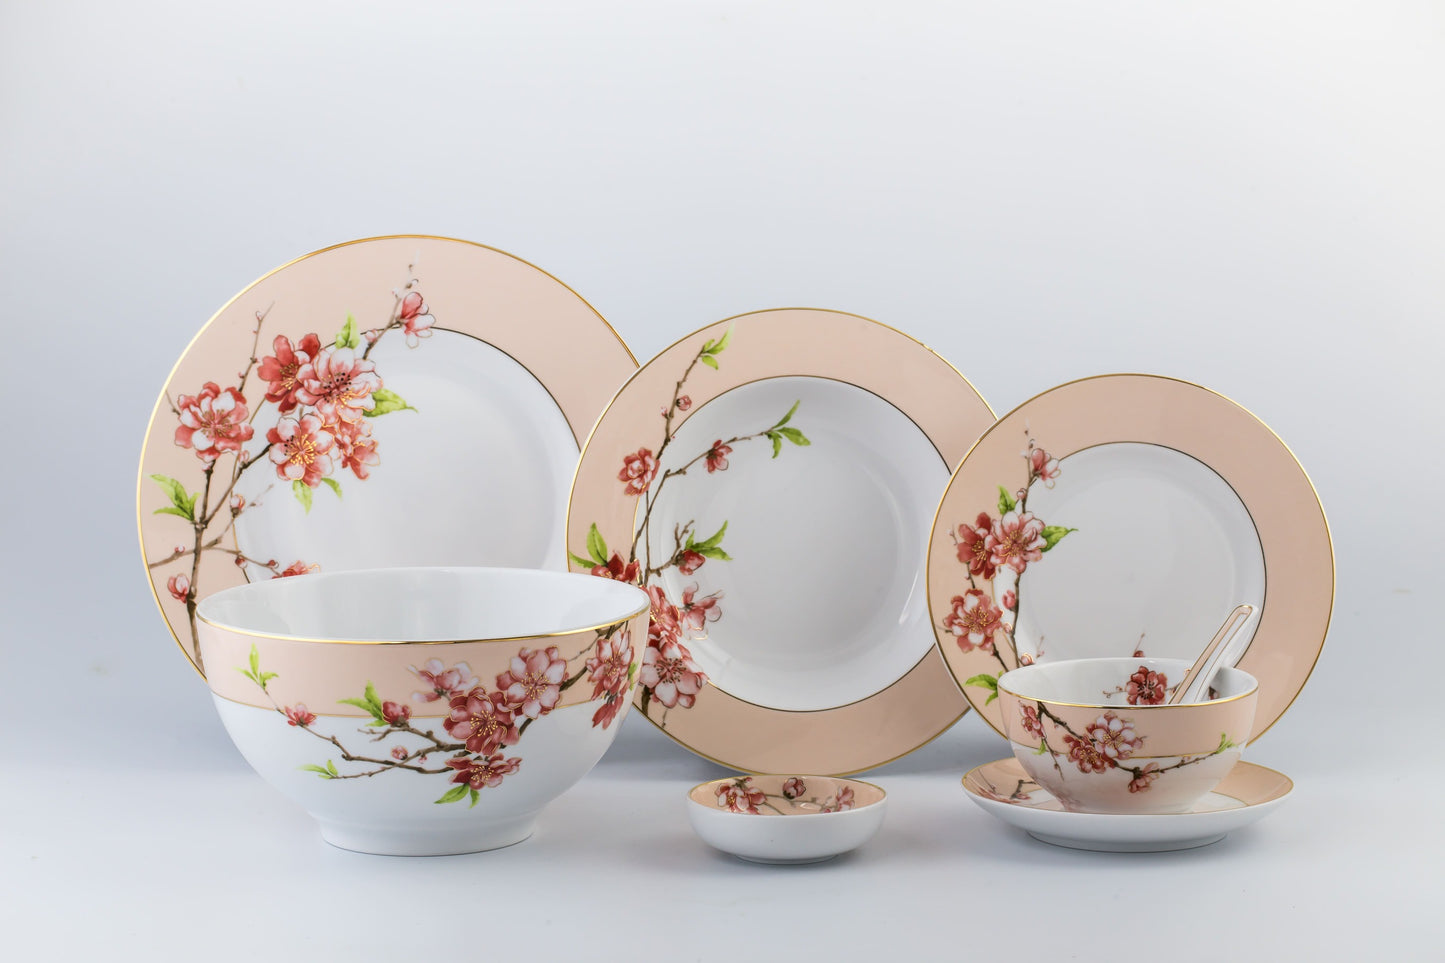 Pink Floral Tableware Collection - Minh Long I (TAO Singapore)